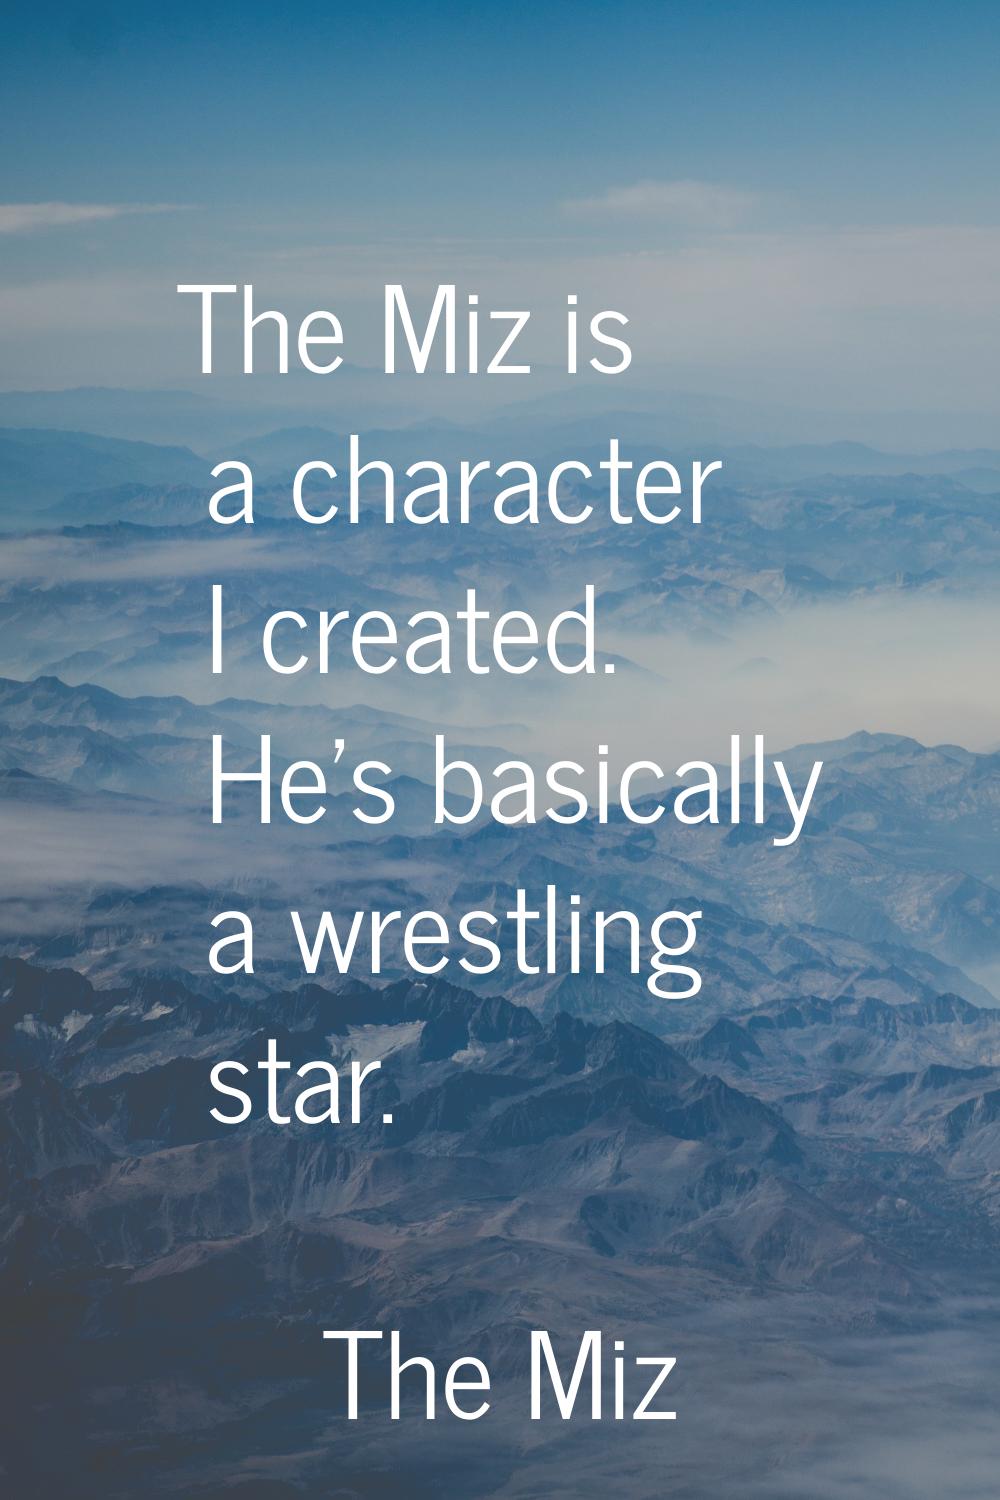 The Miz is a character I created. He's basically a wrestling star.